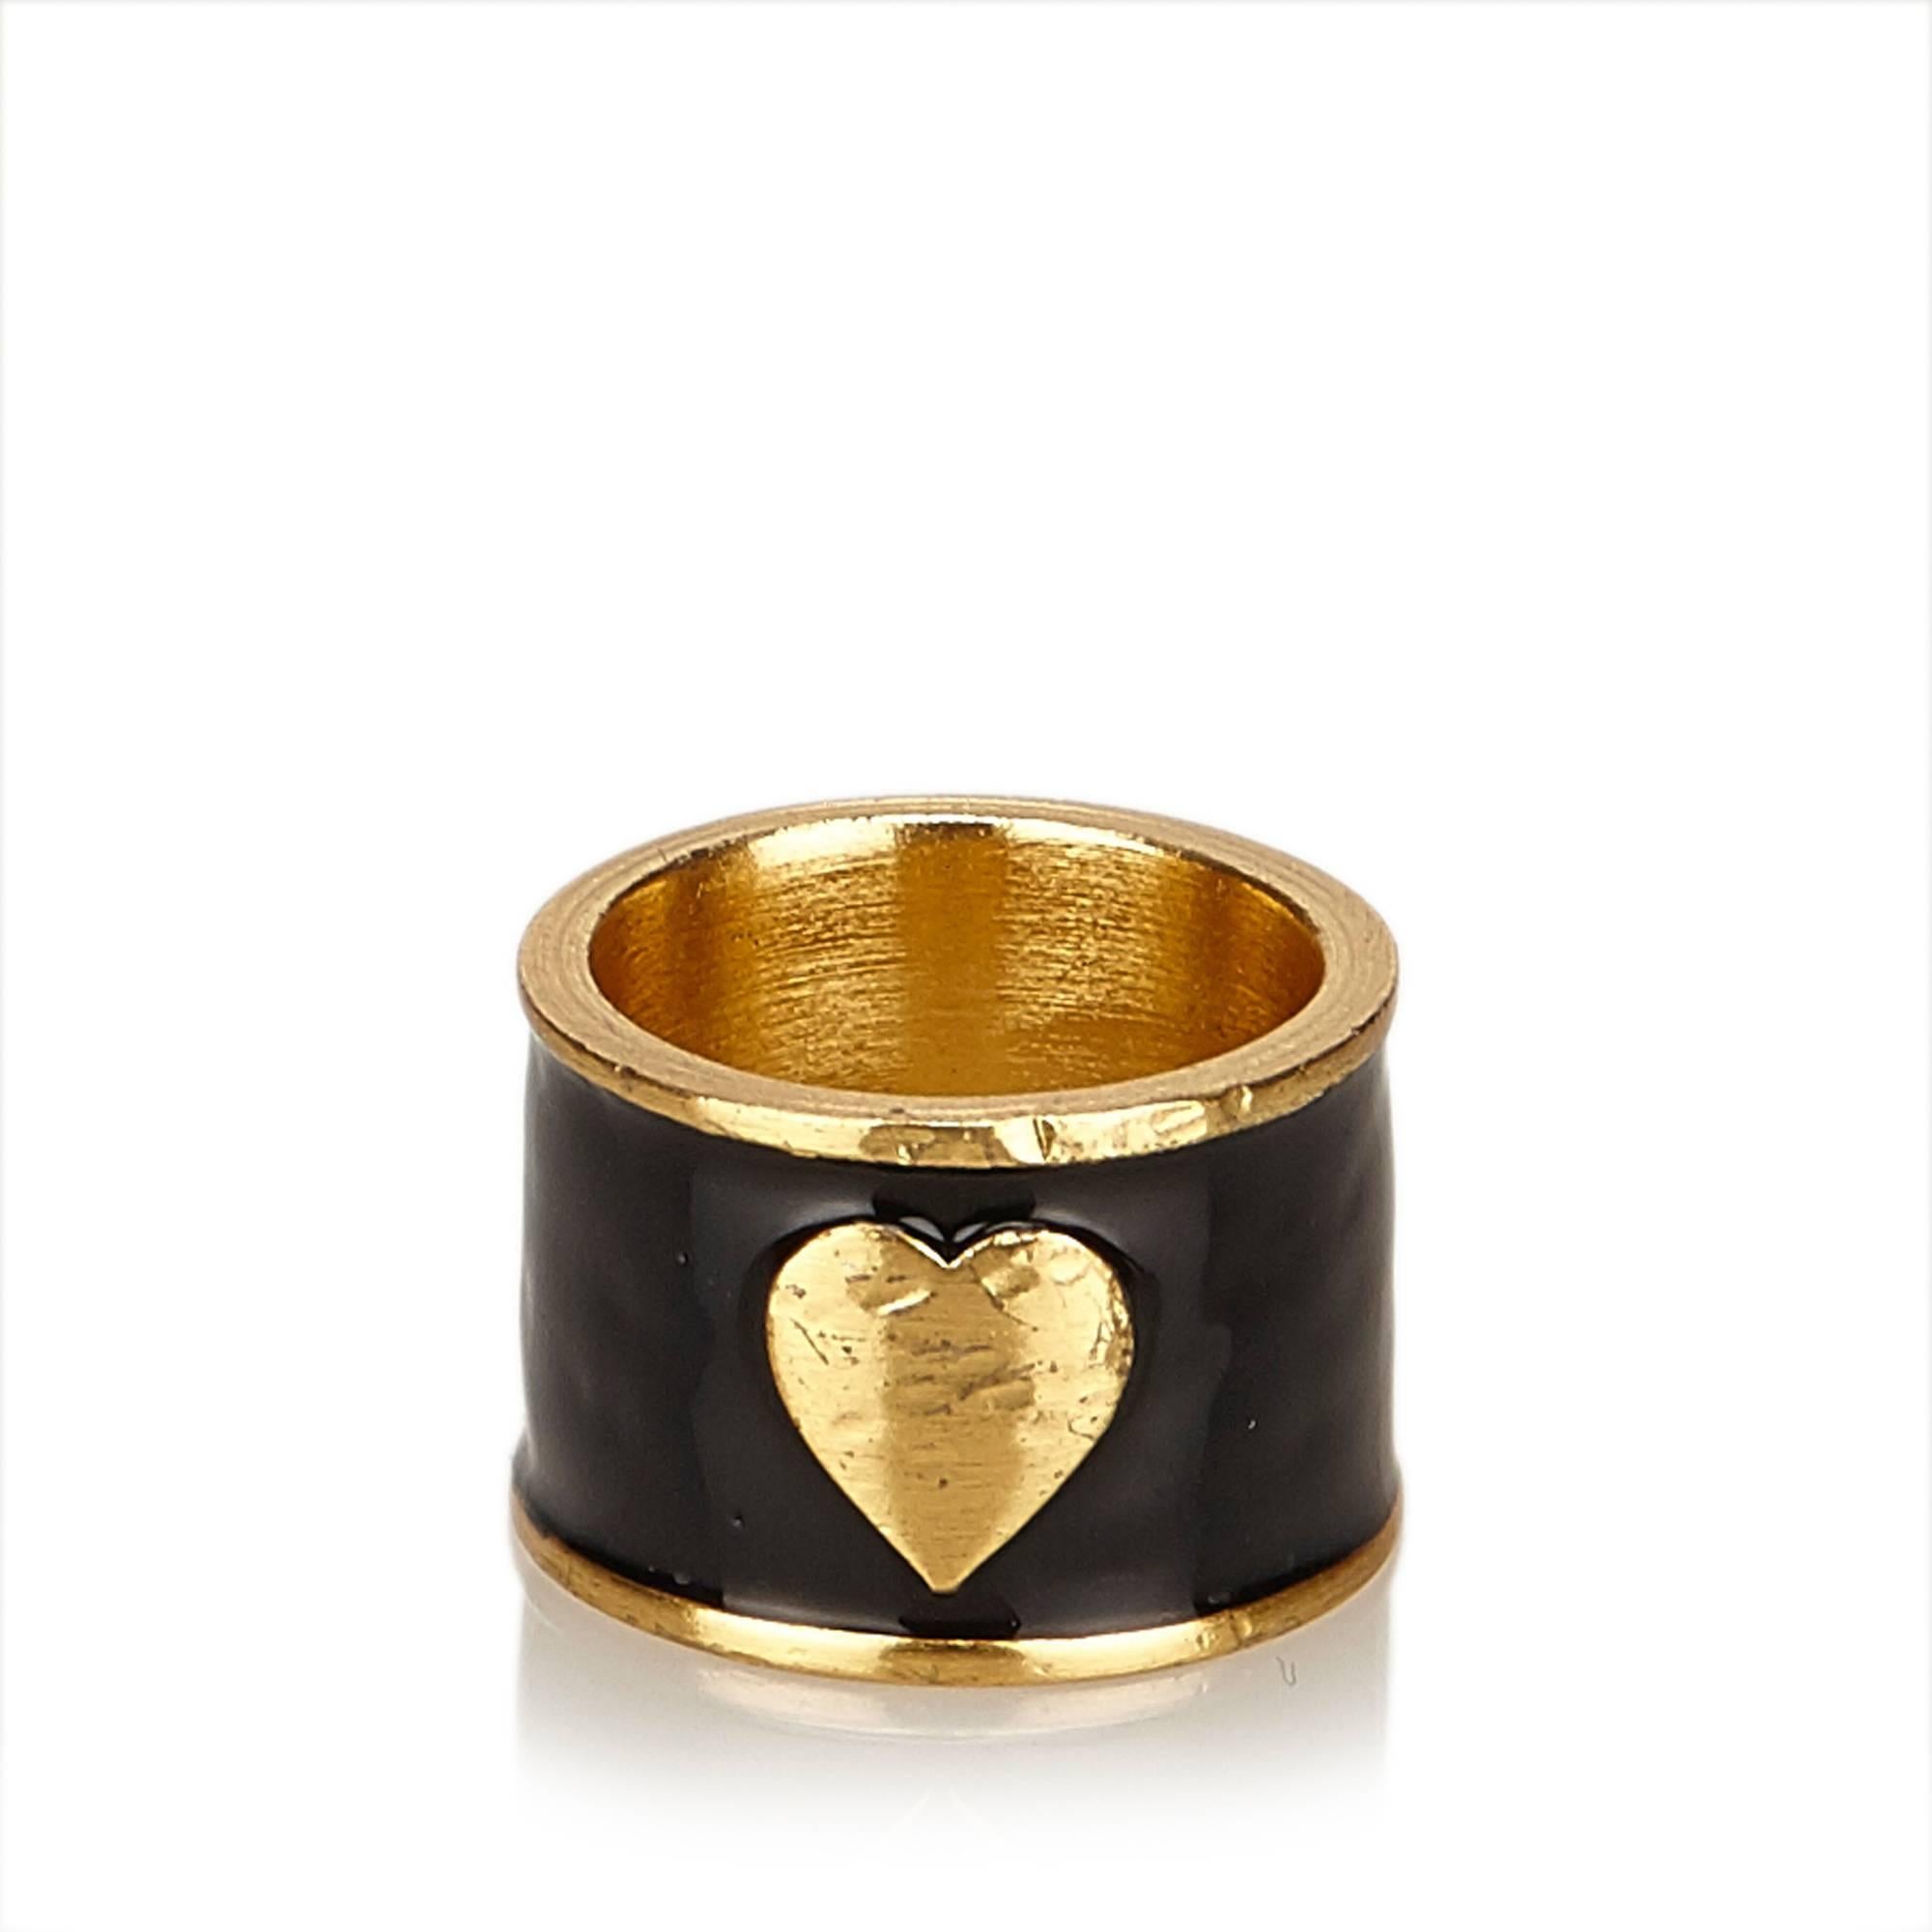 - This Chanel ring features gold toned "CC" and a gold toned "Heart" in black and gold-tone hardware.

- Made in France. 

- Size: 14cm x 1.4cm. (Size 54 Europe). 

- Serial 02P. 